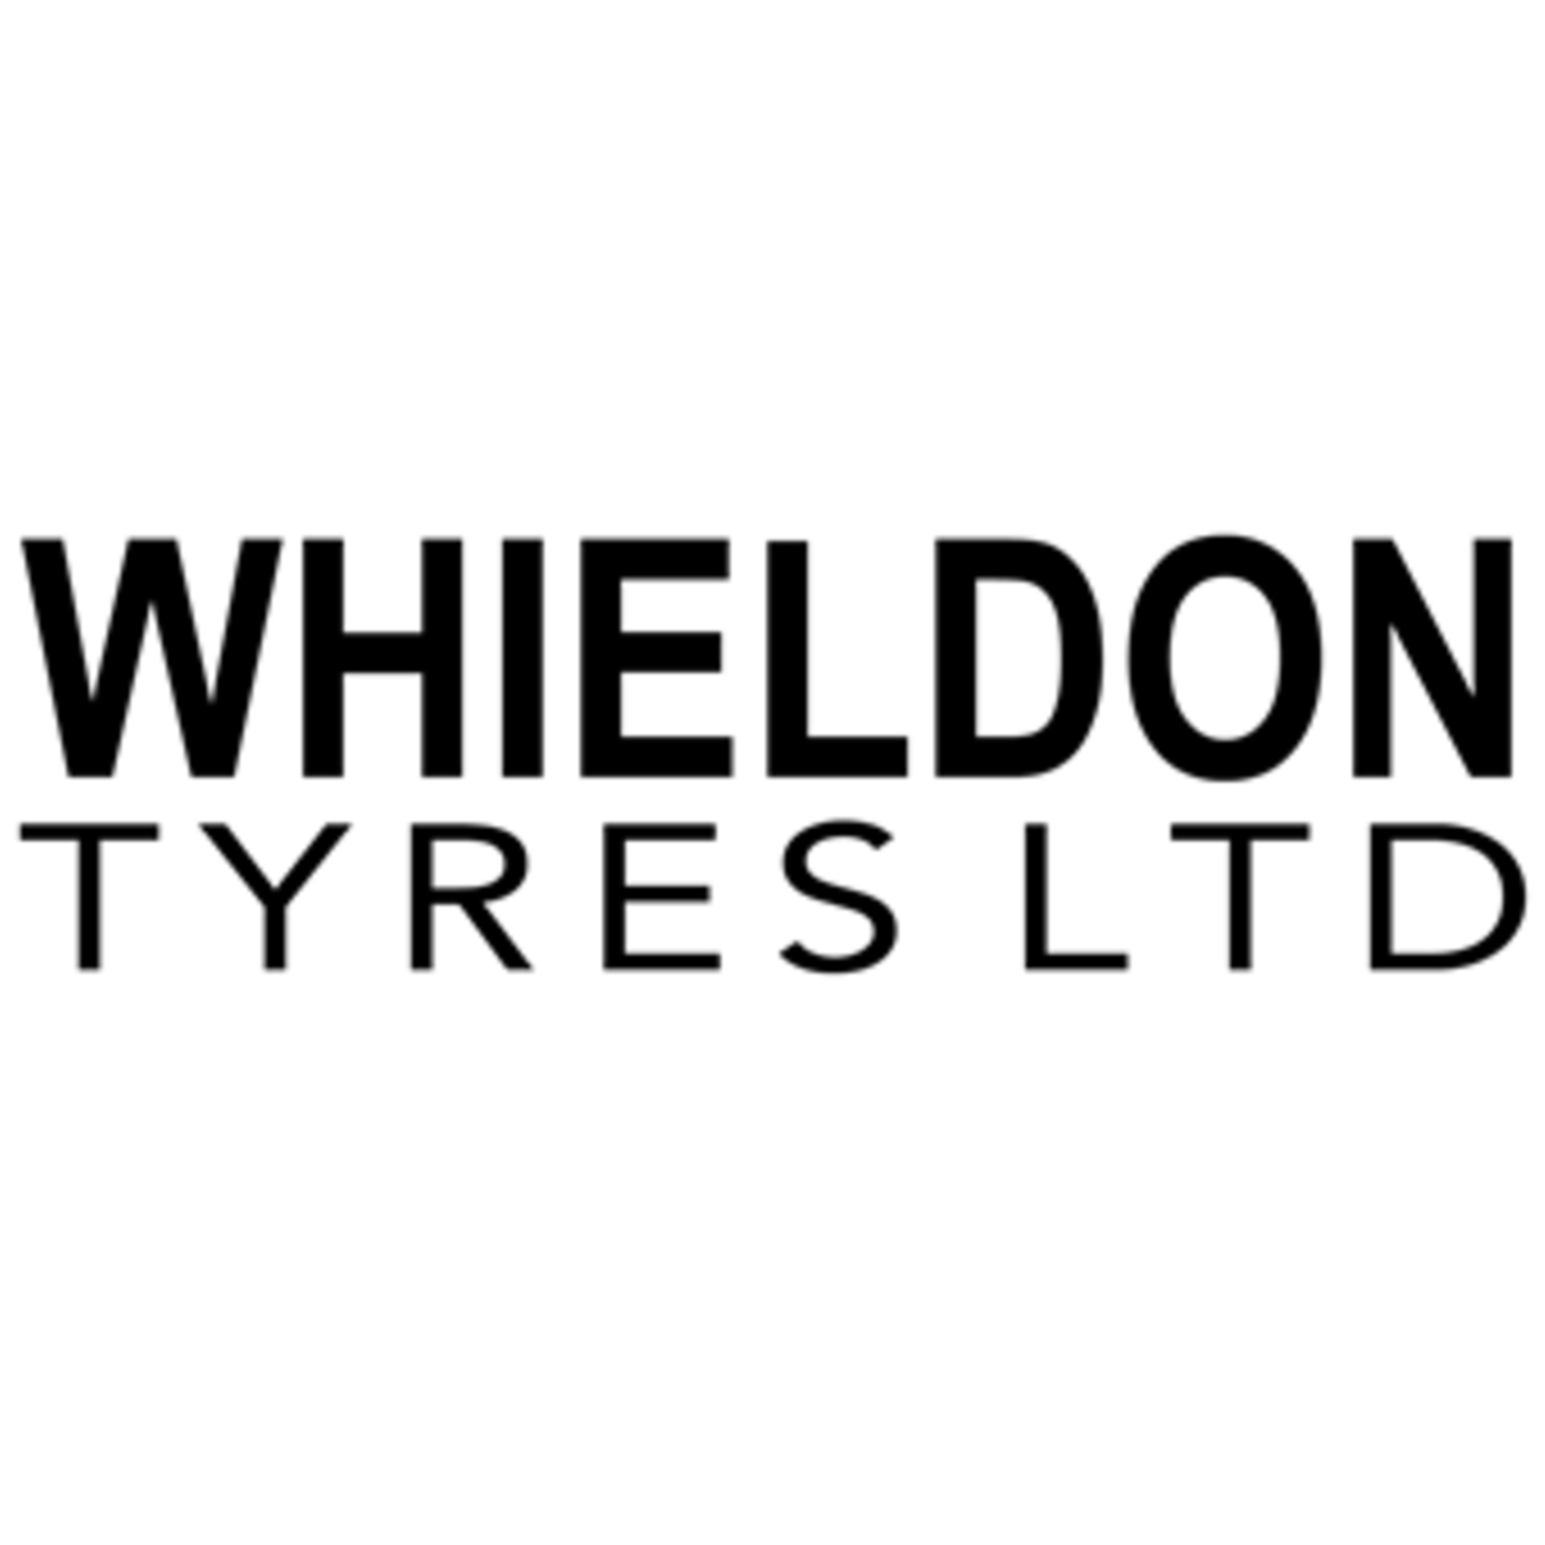 Whieldon Tyres Limited - Leek, Staffordshire ST13 6LX - 01538 383324 | ShowMeLocal.com